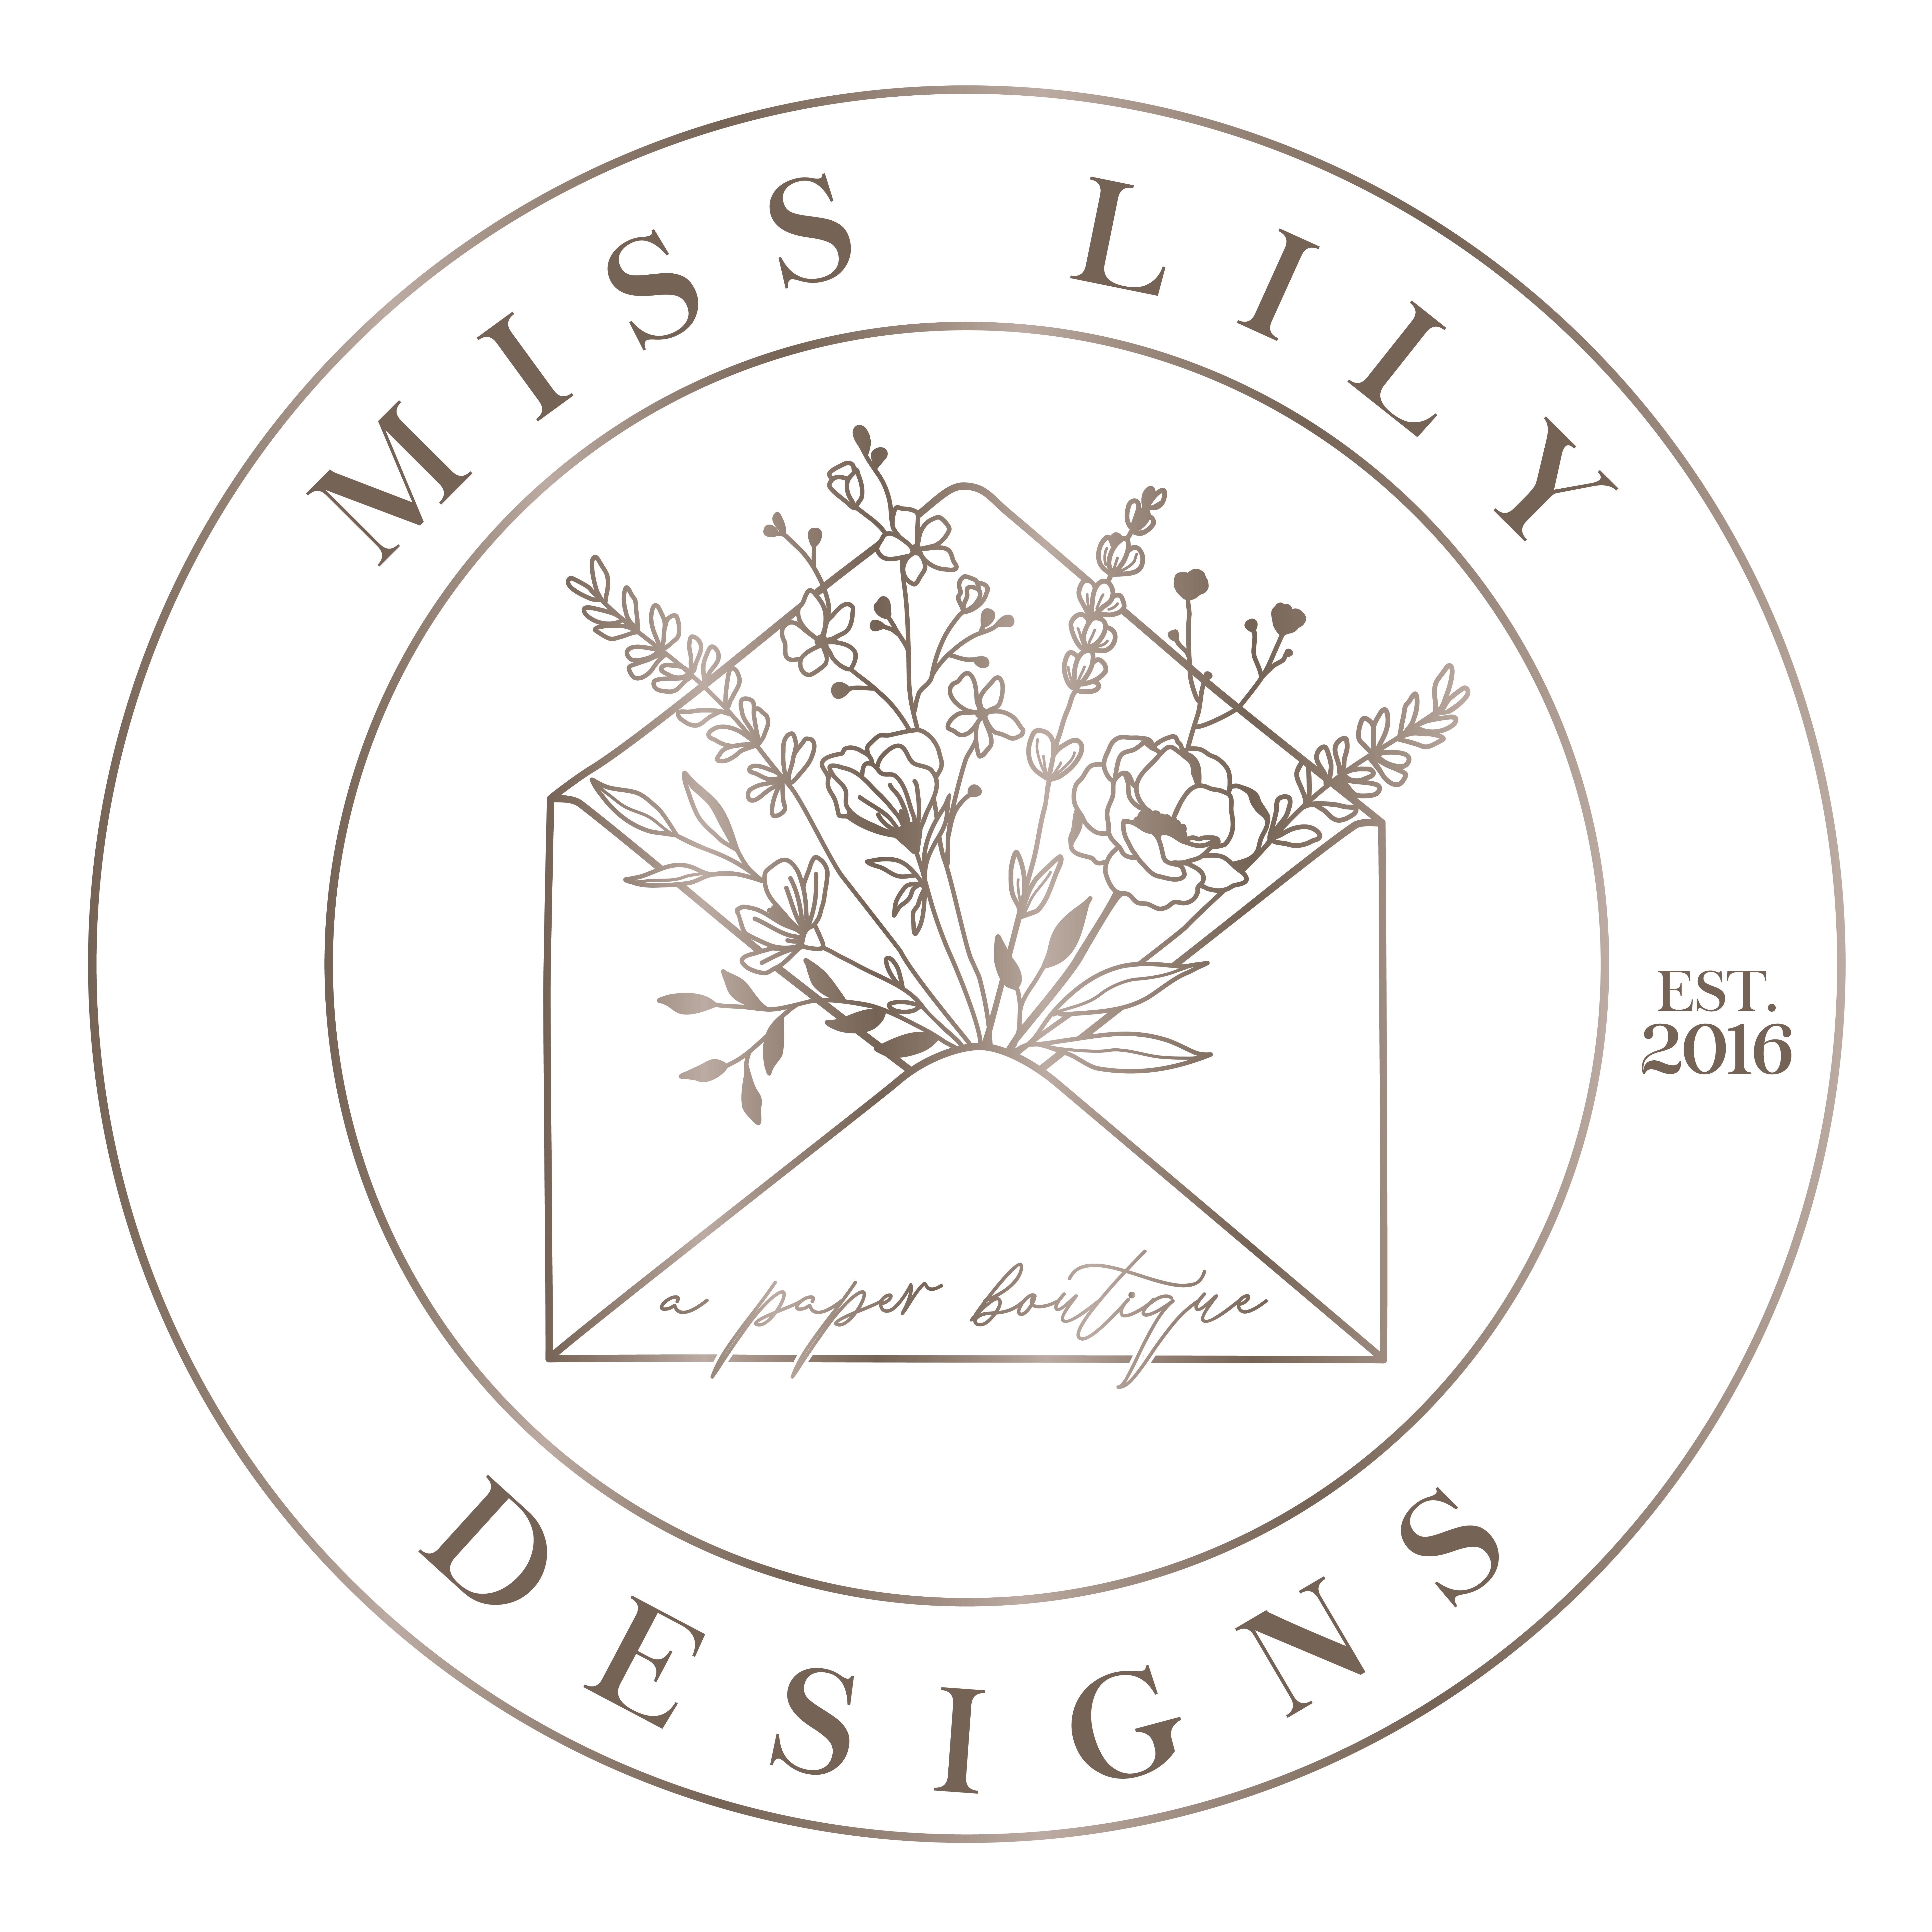 Miss Lily Designs | Invitations & Paper Goods - The Knot